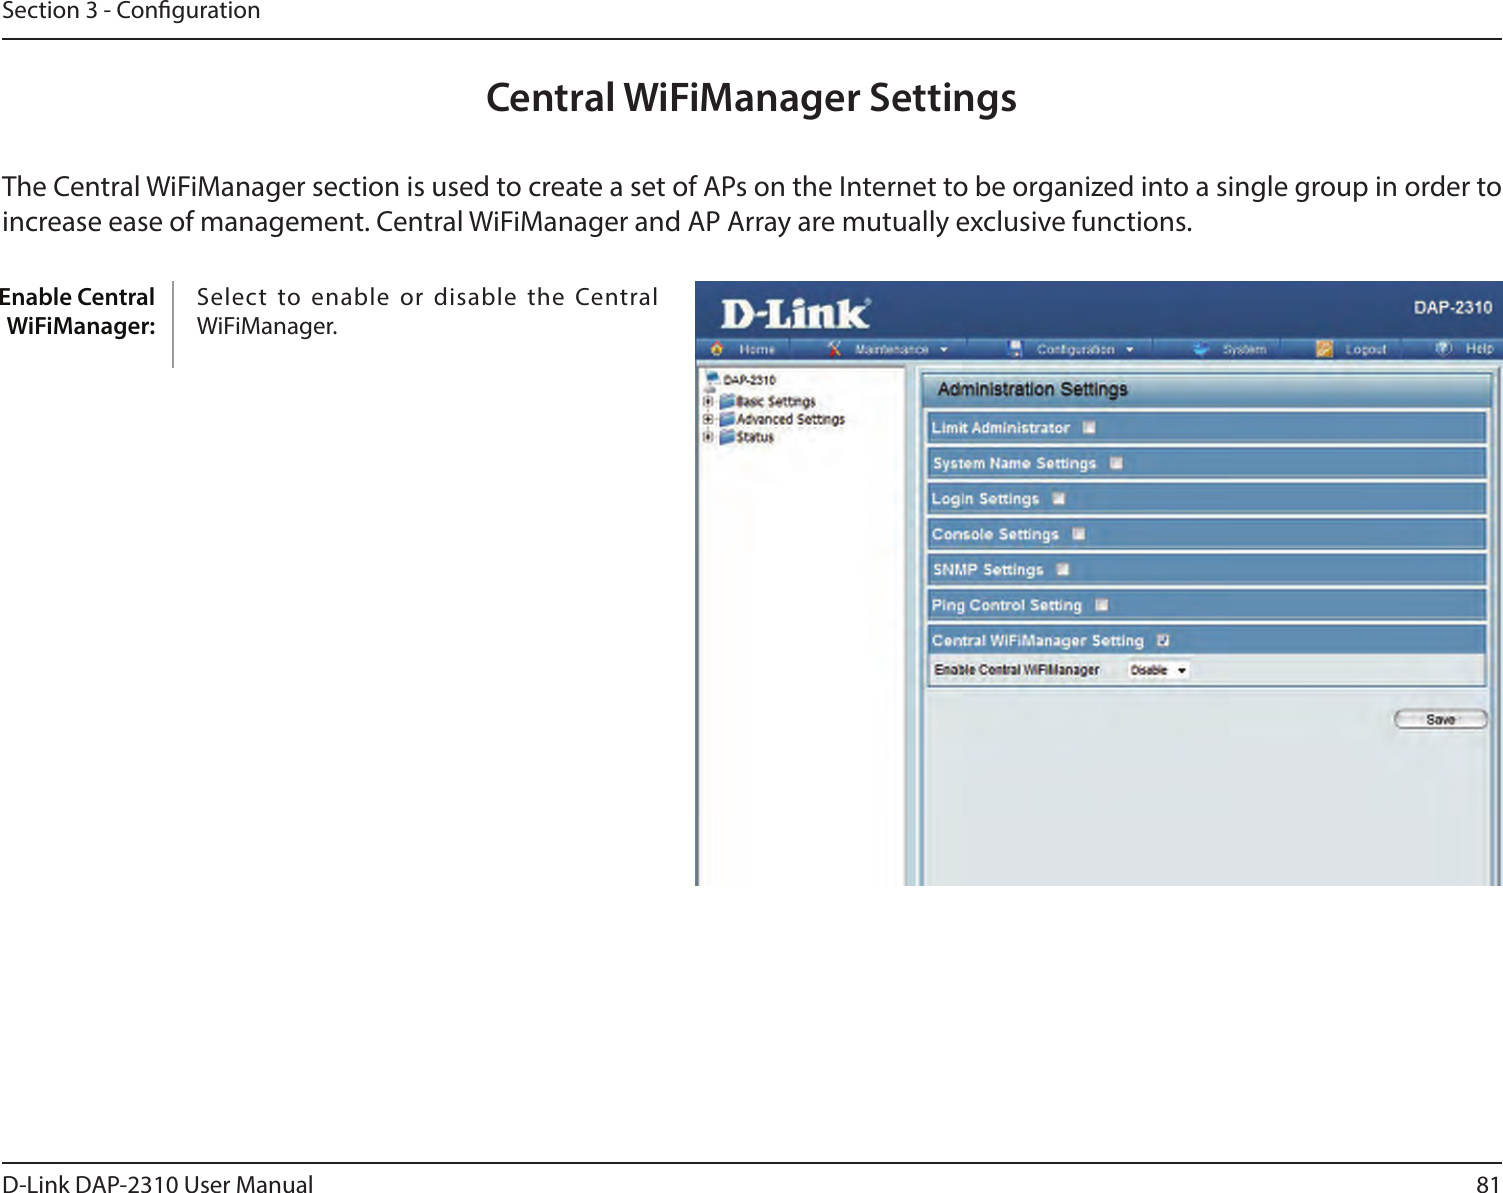 81D-Link DAP-2310 User ManualSection 3 - CongurationEnable Central WiFiManager:Central WiFiManager SettingsThe Central WiFiManager section is used to create a set of APs on the Internet to be organized into a single group in order to increase ease of management. Central WiFiManager and AP Array are mutually exclusive functions.Select  to enable or  disable  the Central WiFiManager.